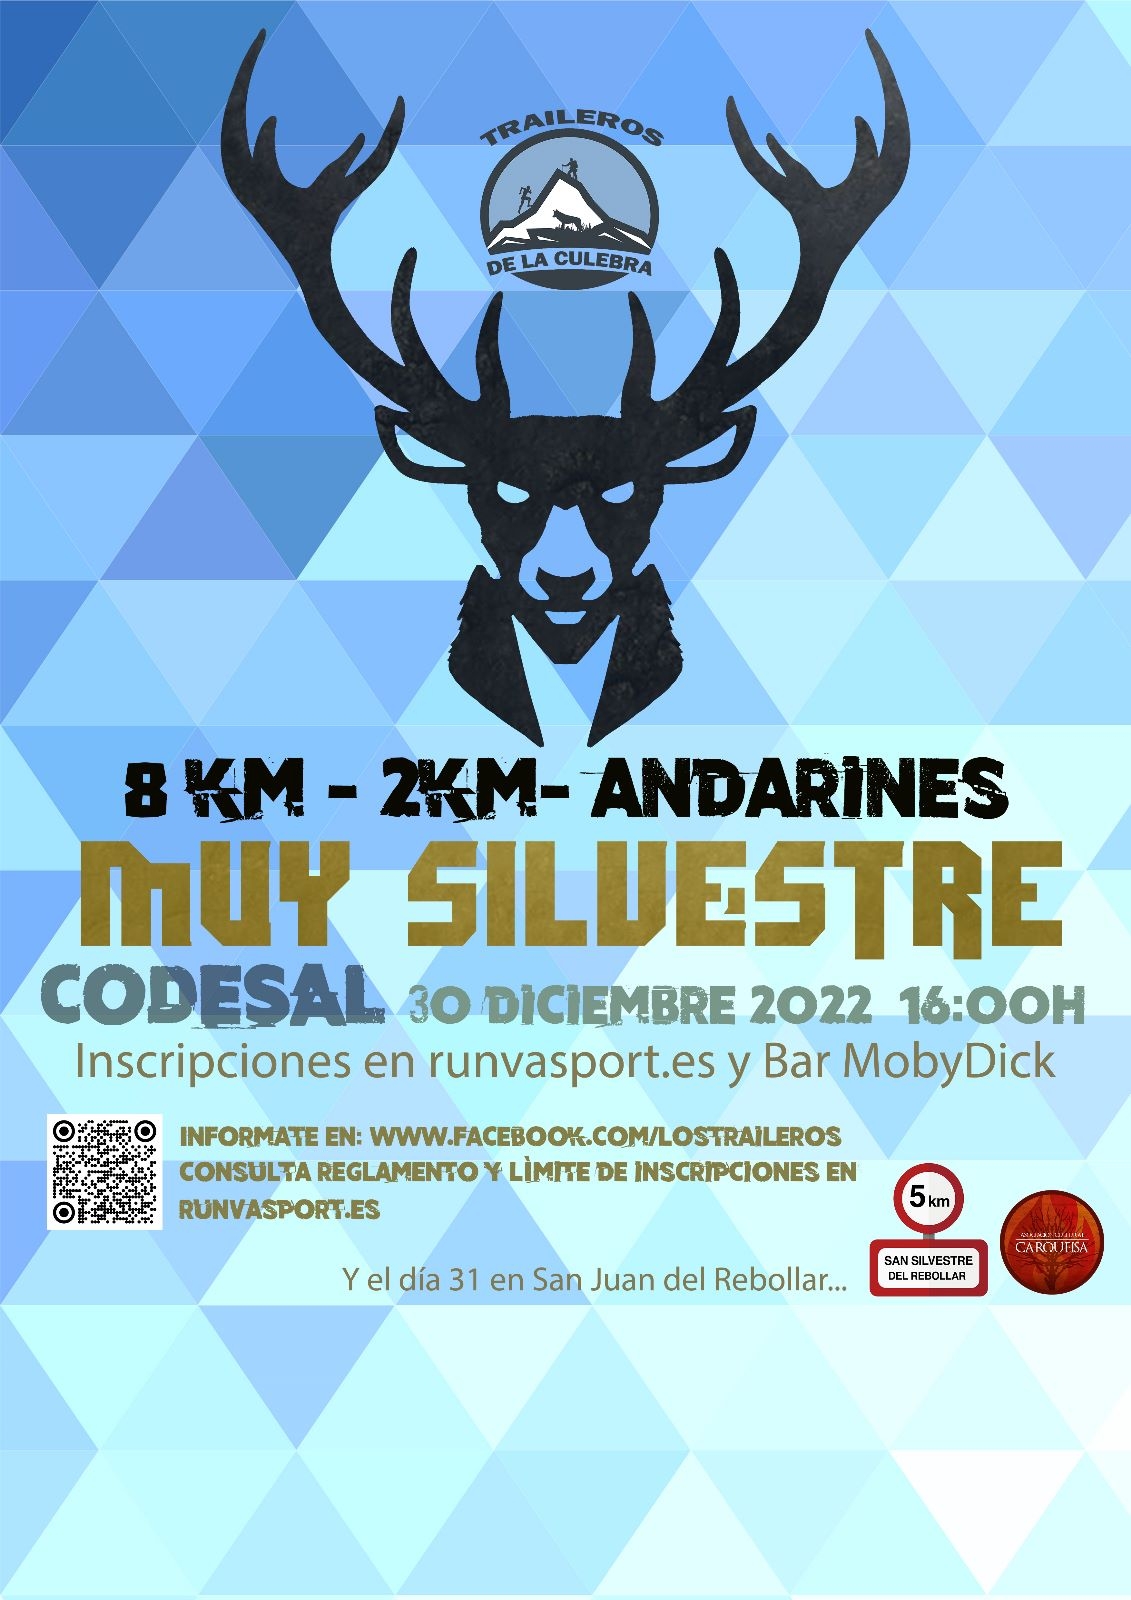 Event Poster X MUY SILVESTRE CODESALINA